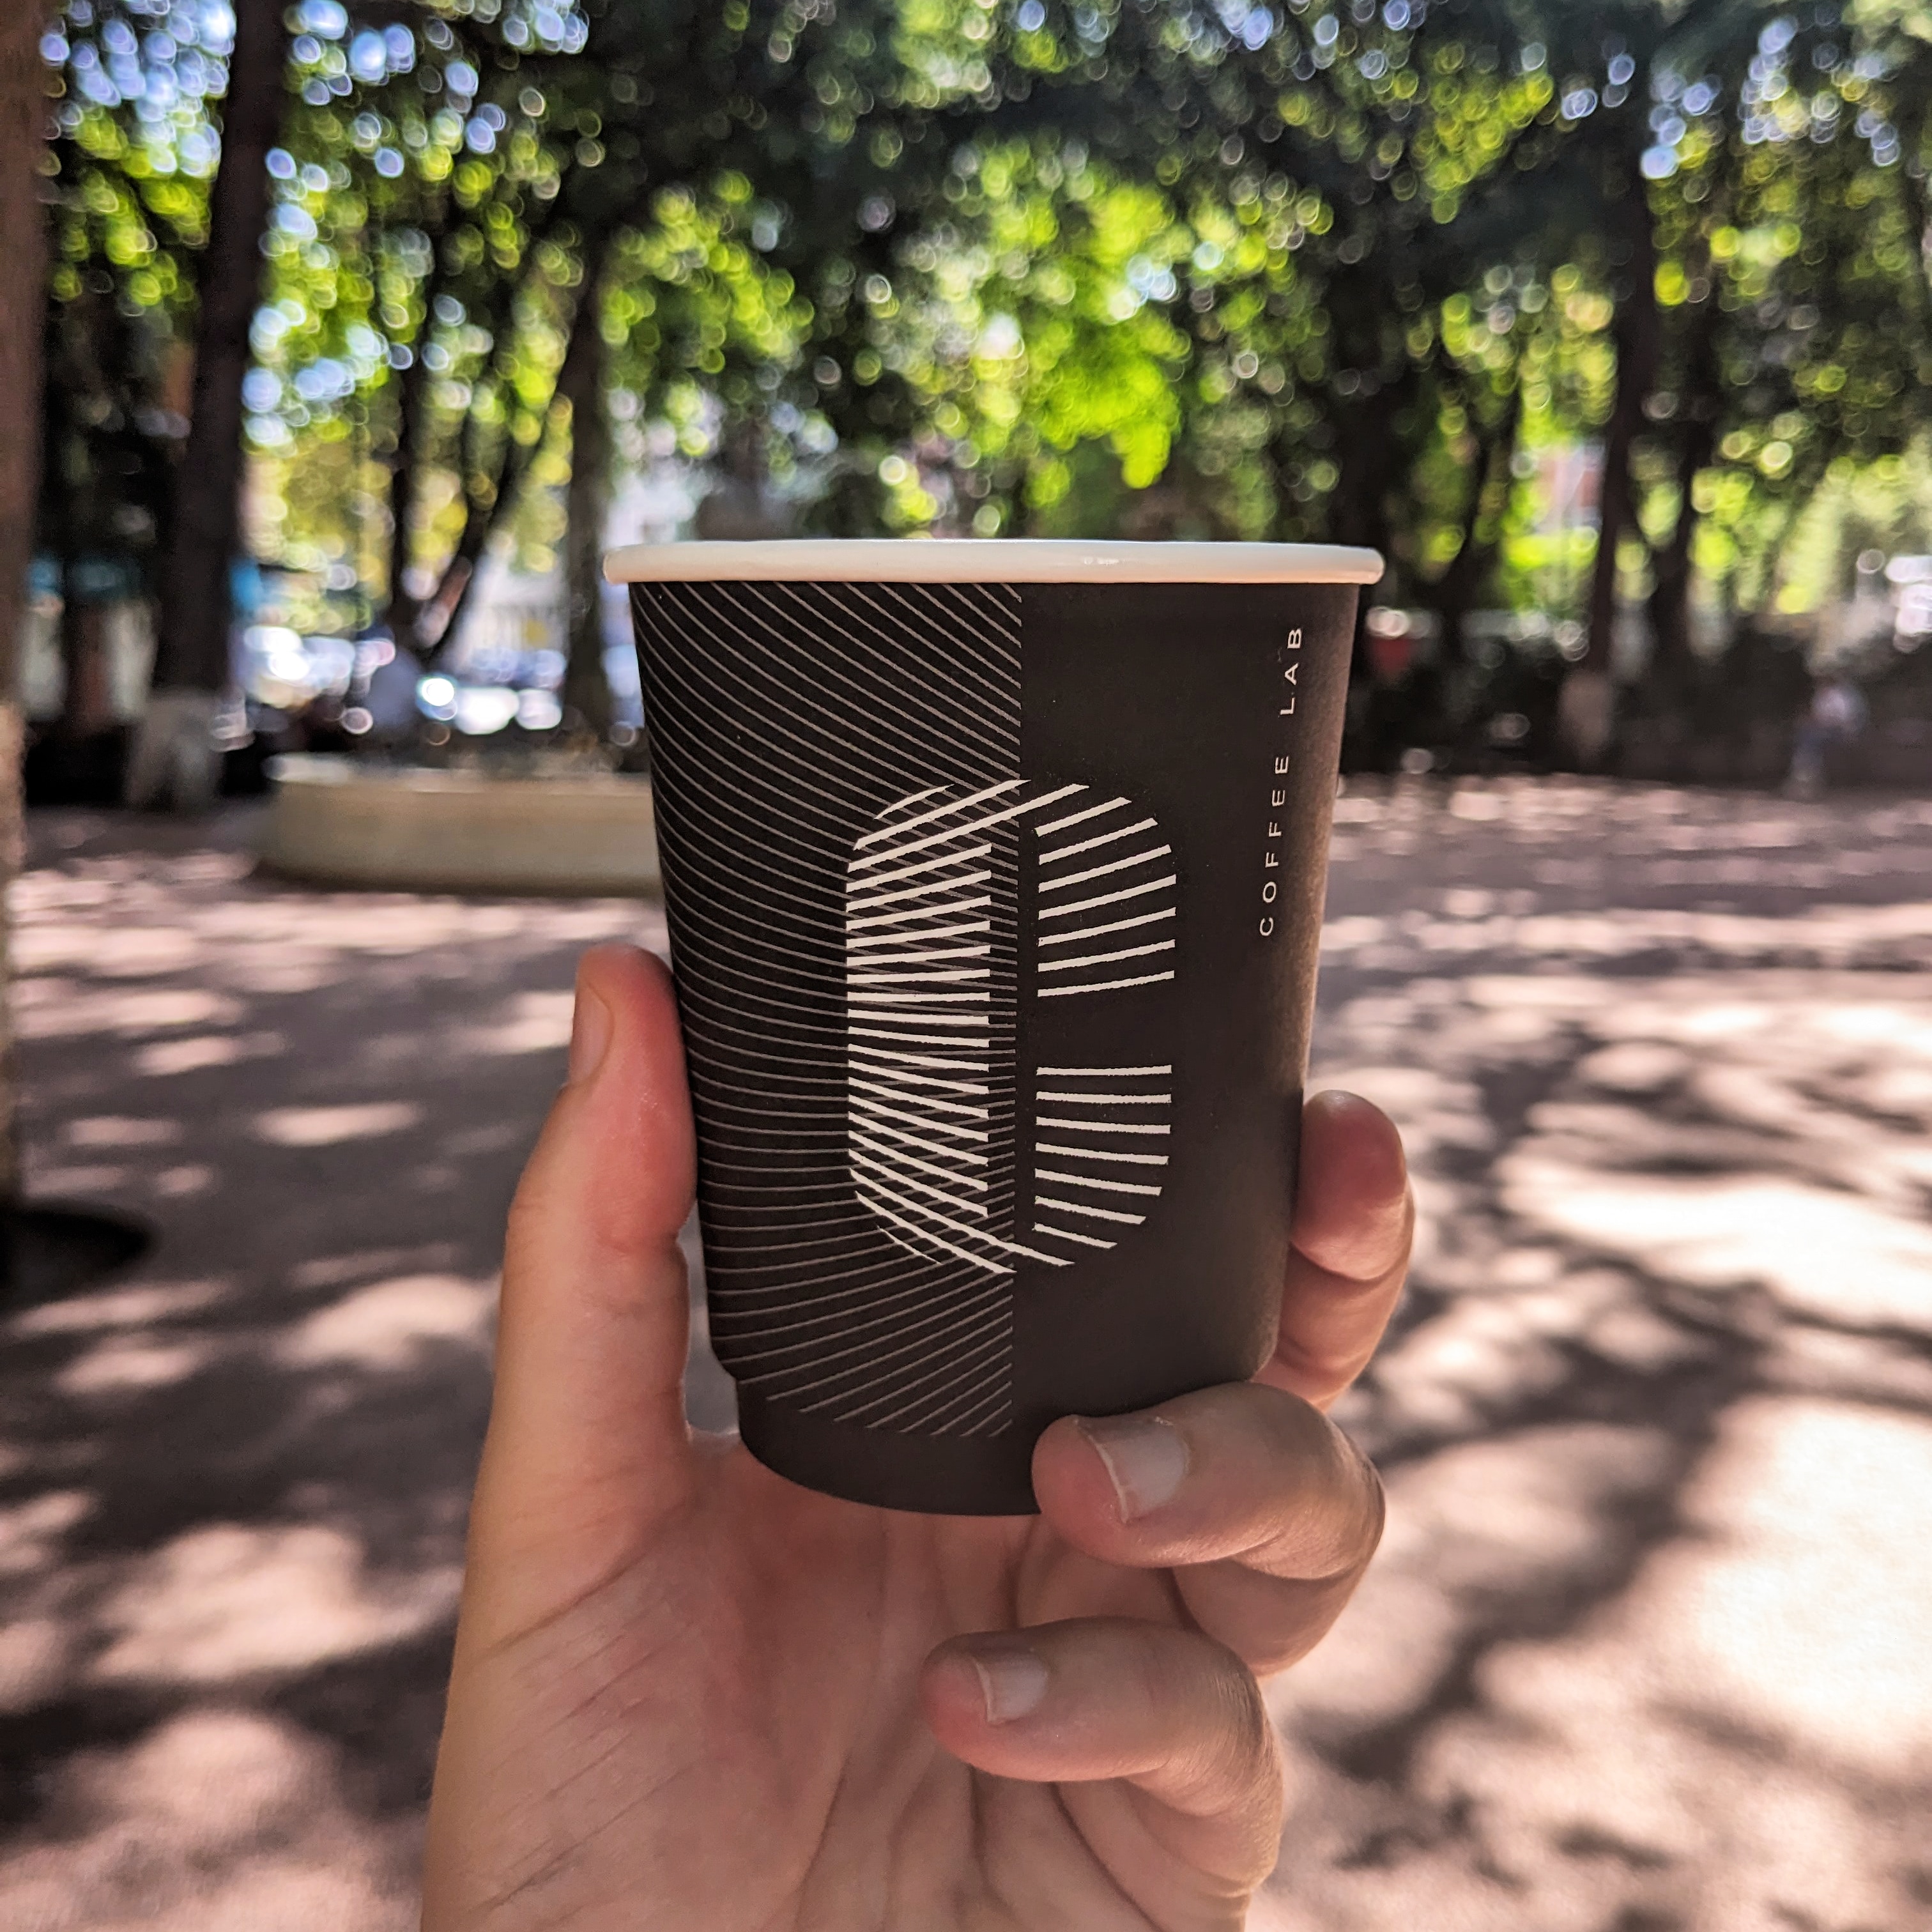 A flat white in a black take out coffee cup embellished with a white letter c. The coffee is from Coffee Lab, one of the best cafes in Tbilisi